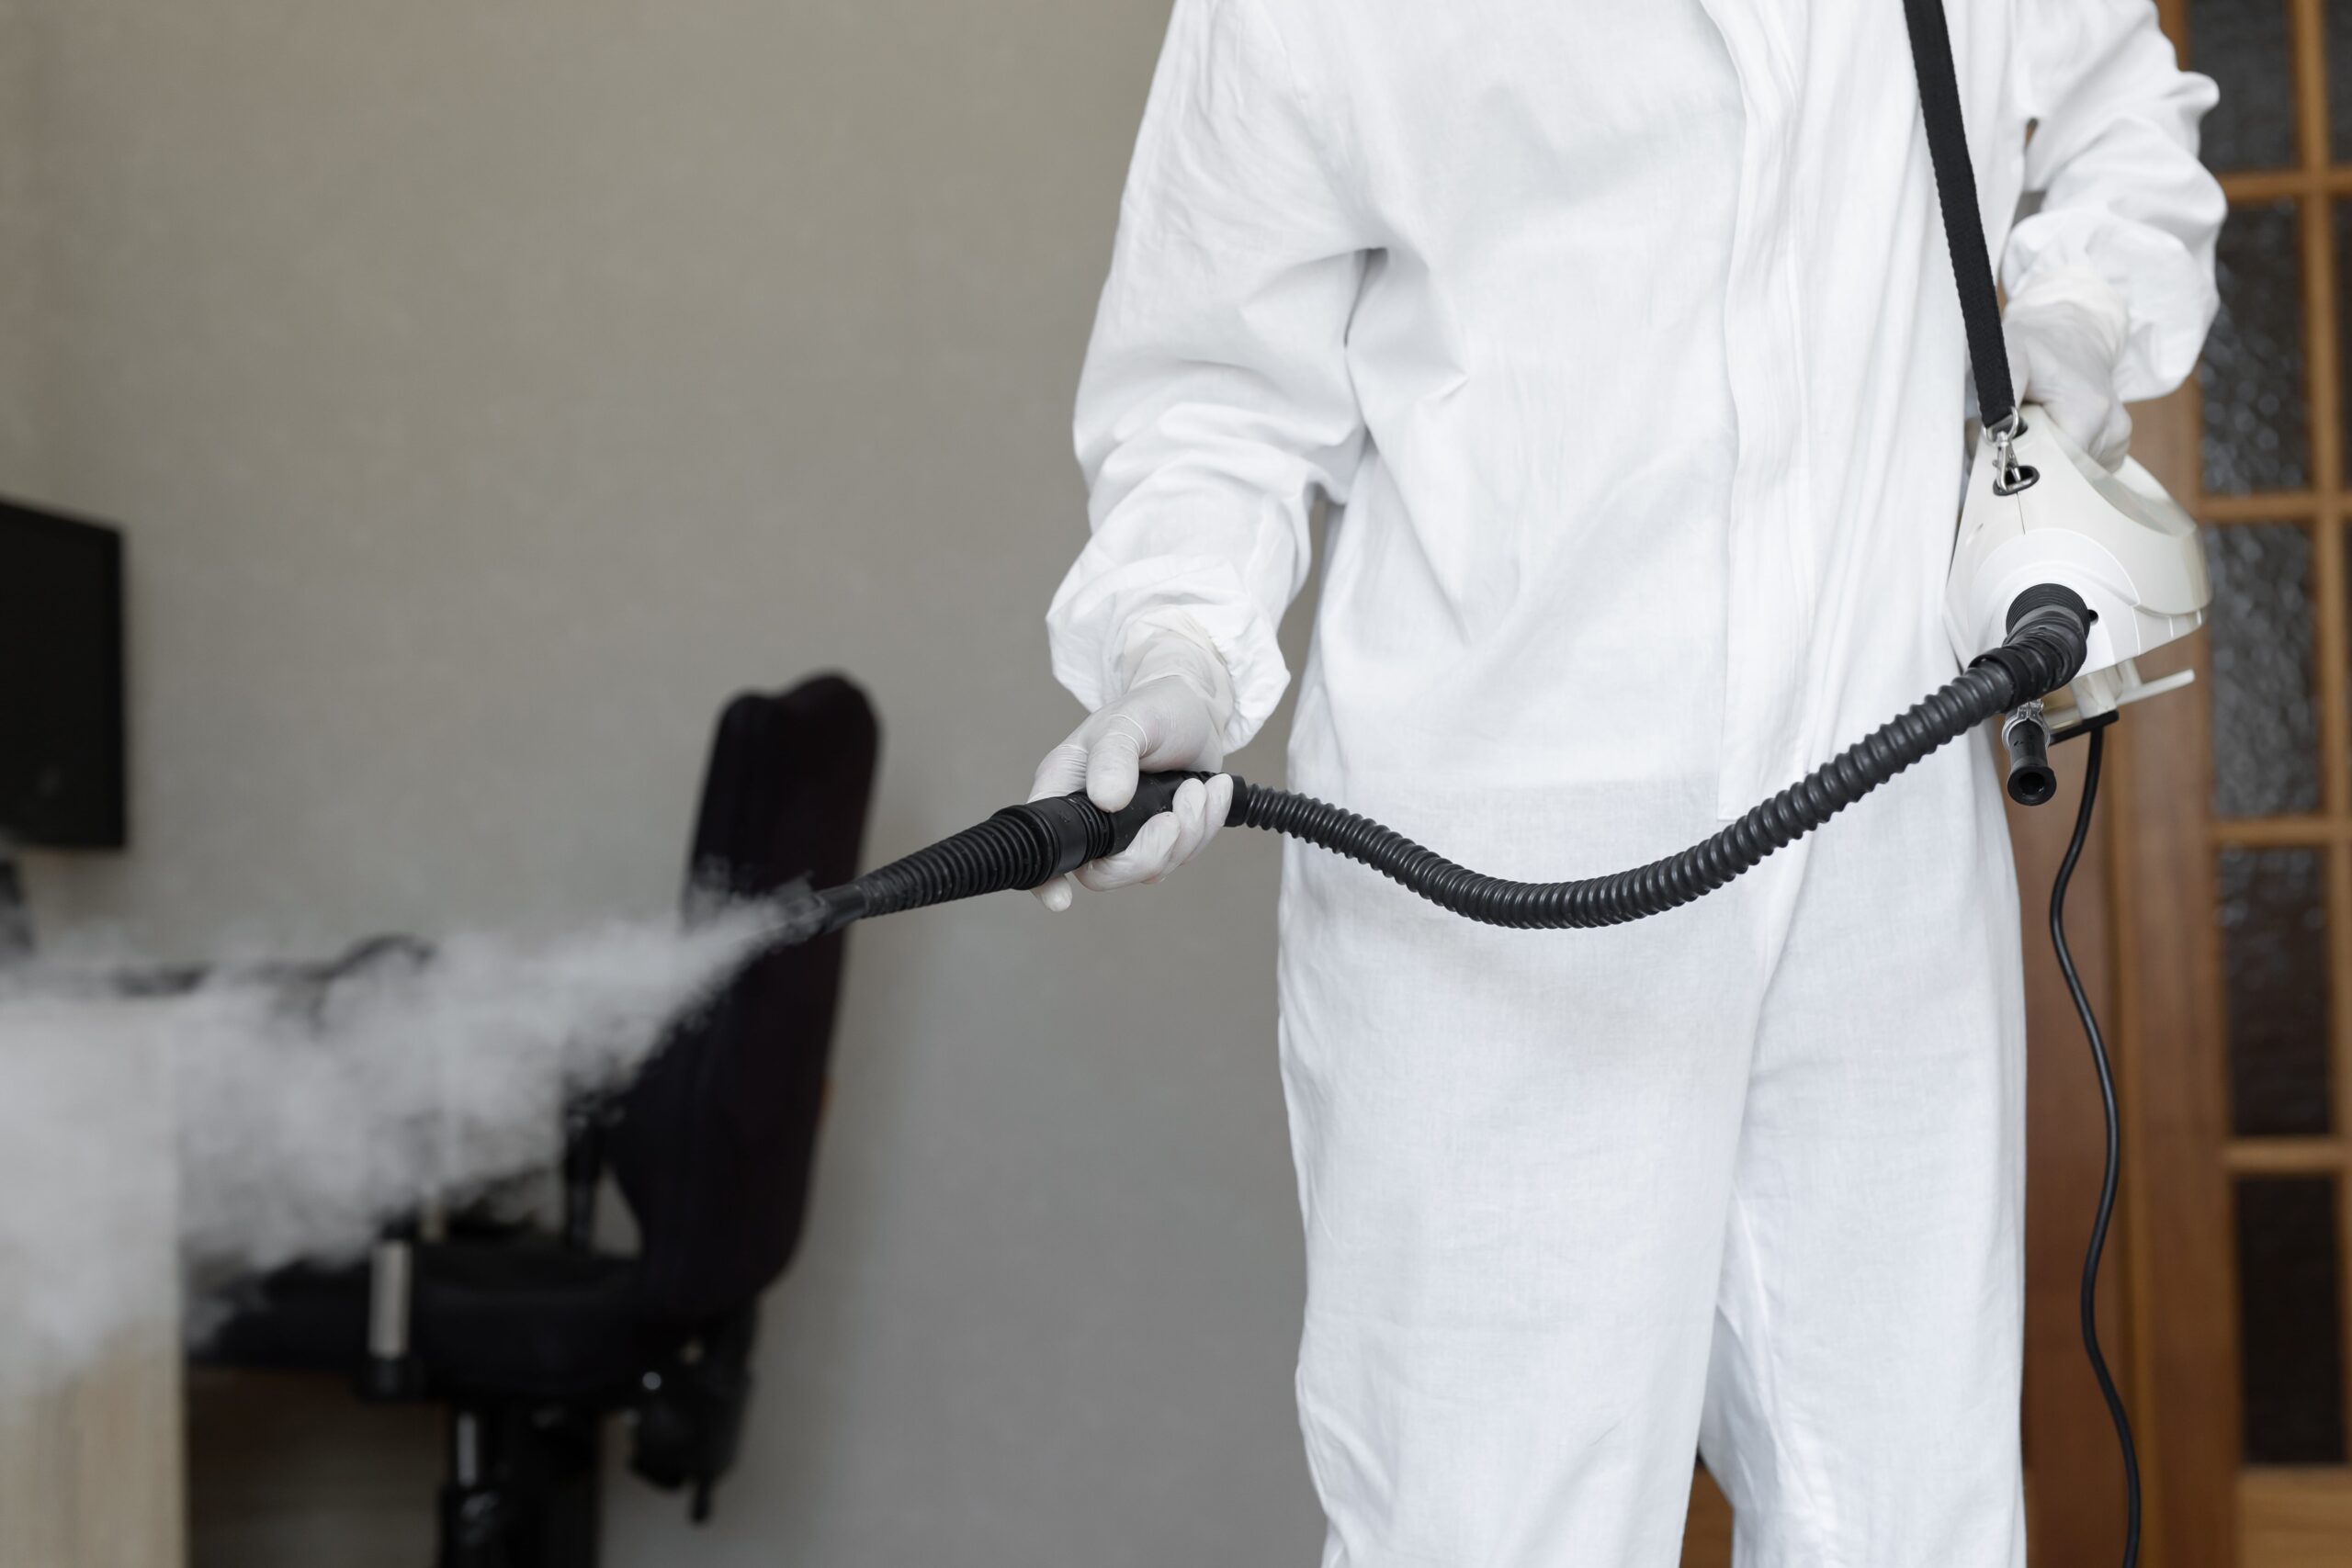 man getting rid of mold while wearing a hazmat suit